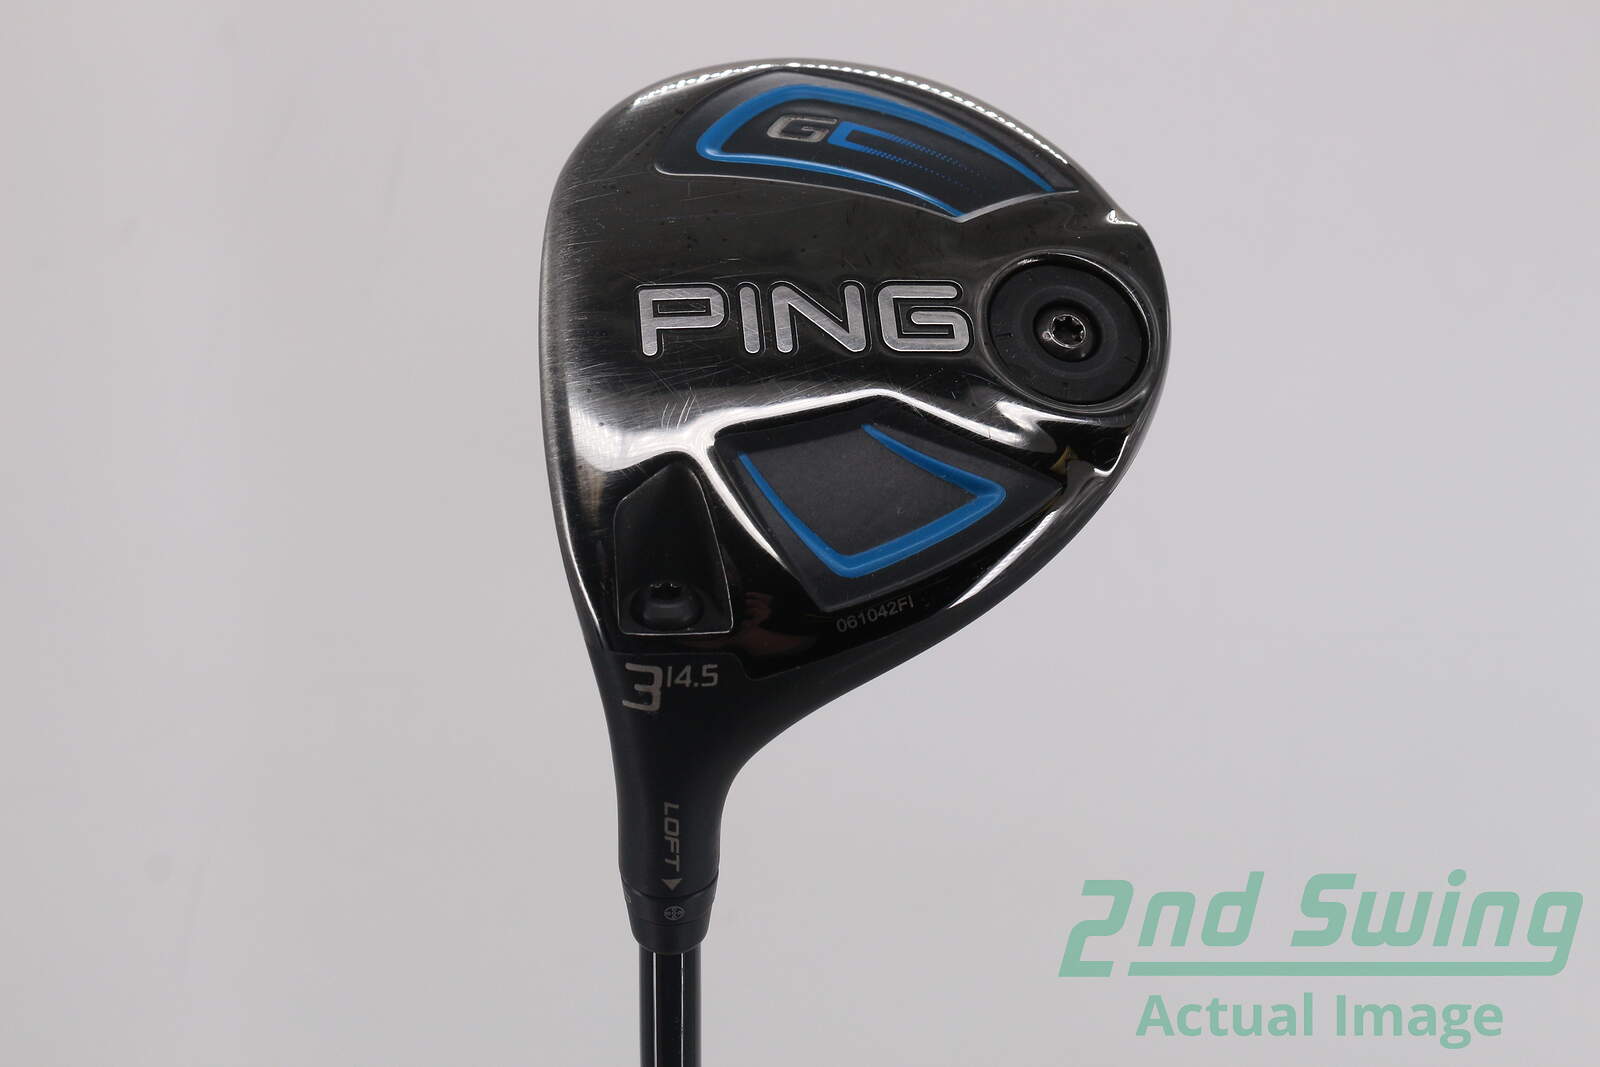 Used Tour Issue Ping 16 G Fairway Wood 3 Wood 3w 14 5 Mitsubishi Tensei Ck 70 Blue Graphite X Stiff Left Handed 42 5in Used Golf Club 2nd Swing Golf